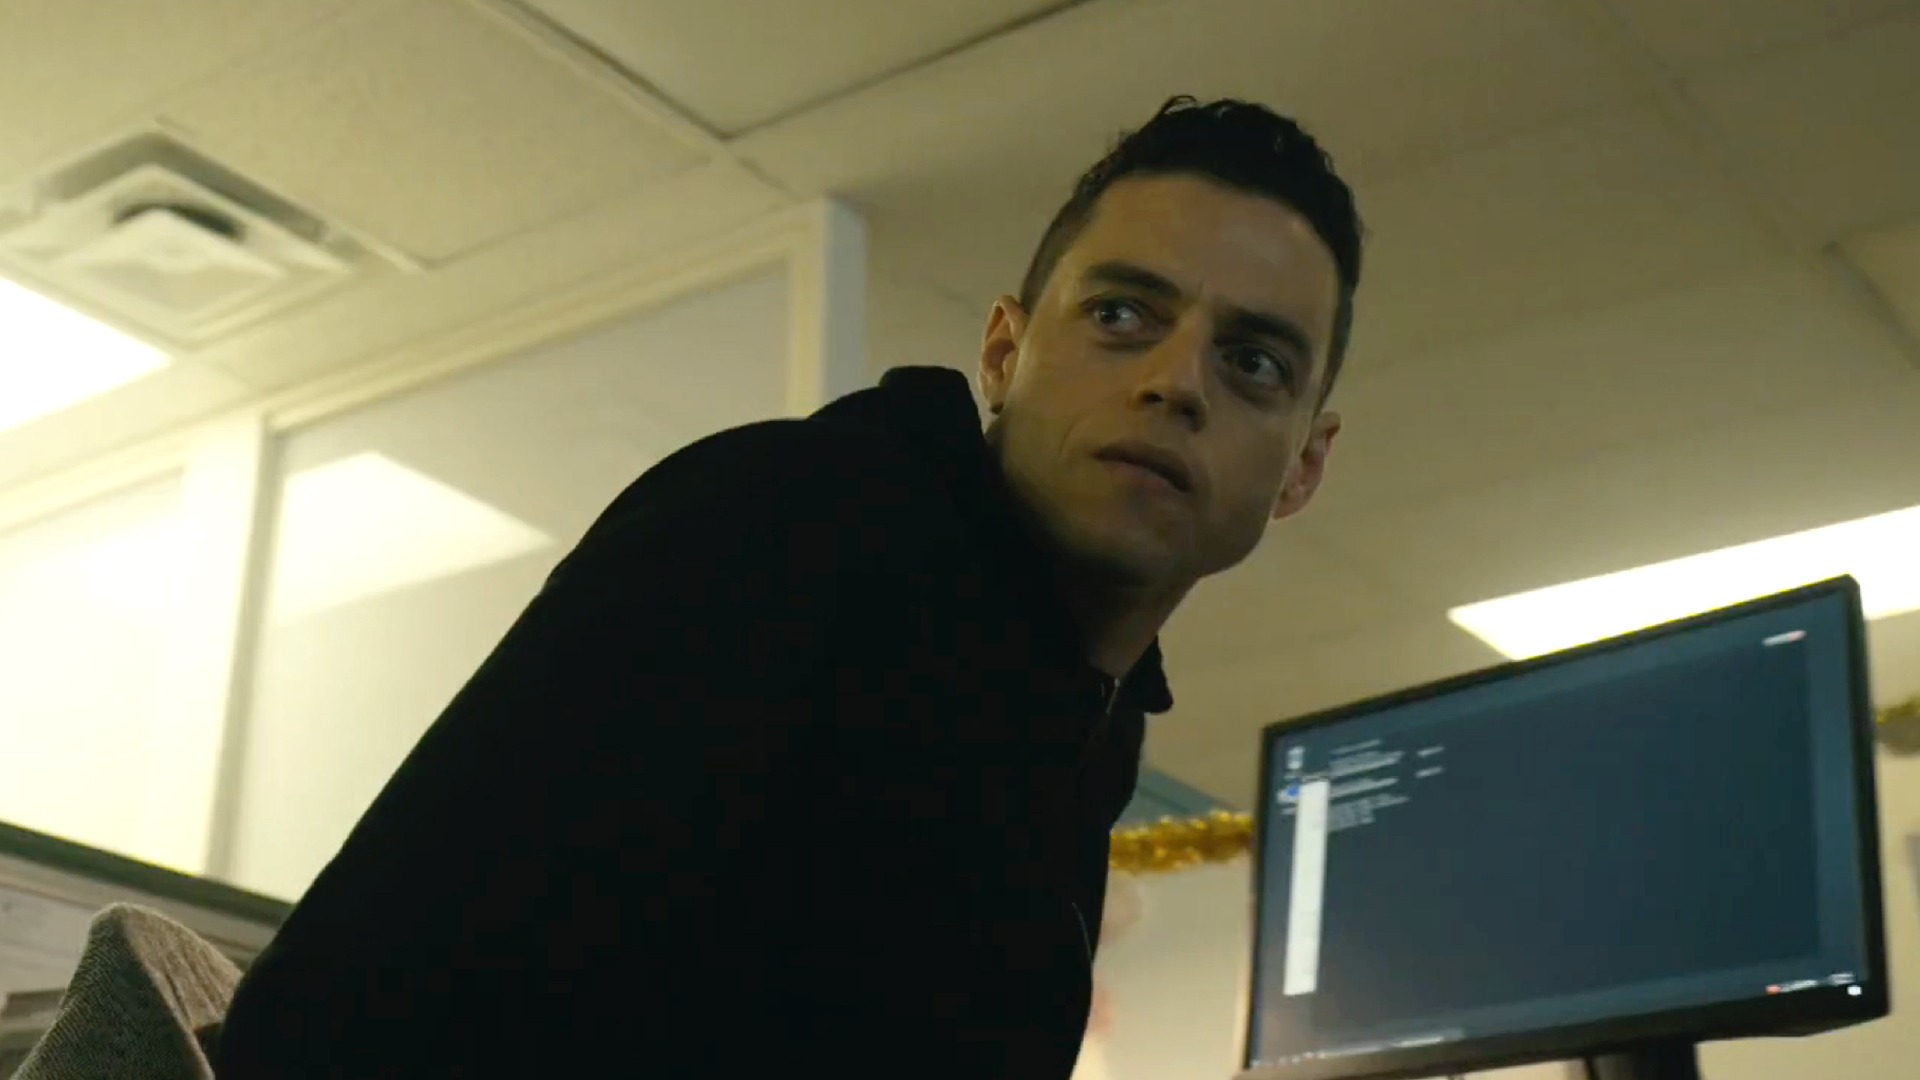 Where can you stream Mr. Robot in 2022?